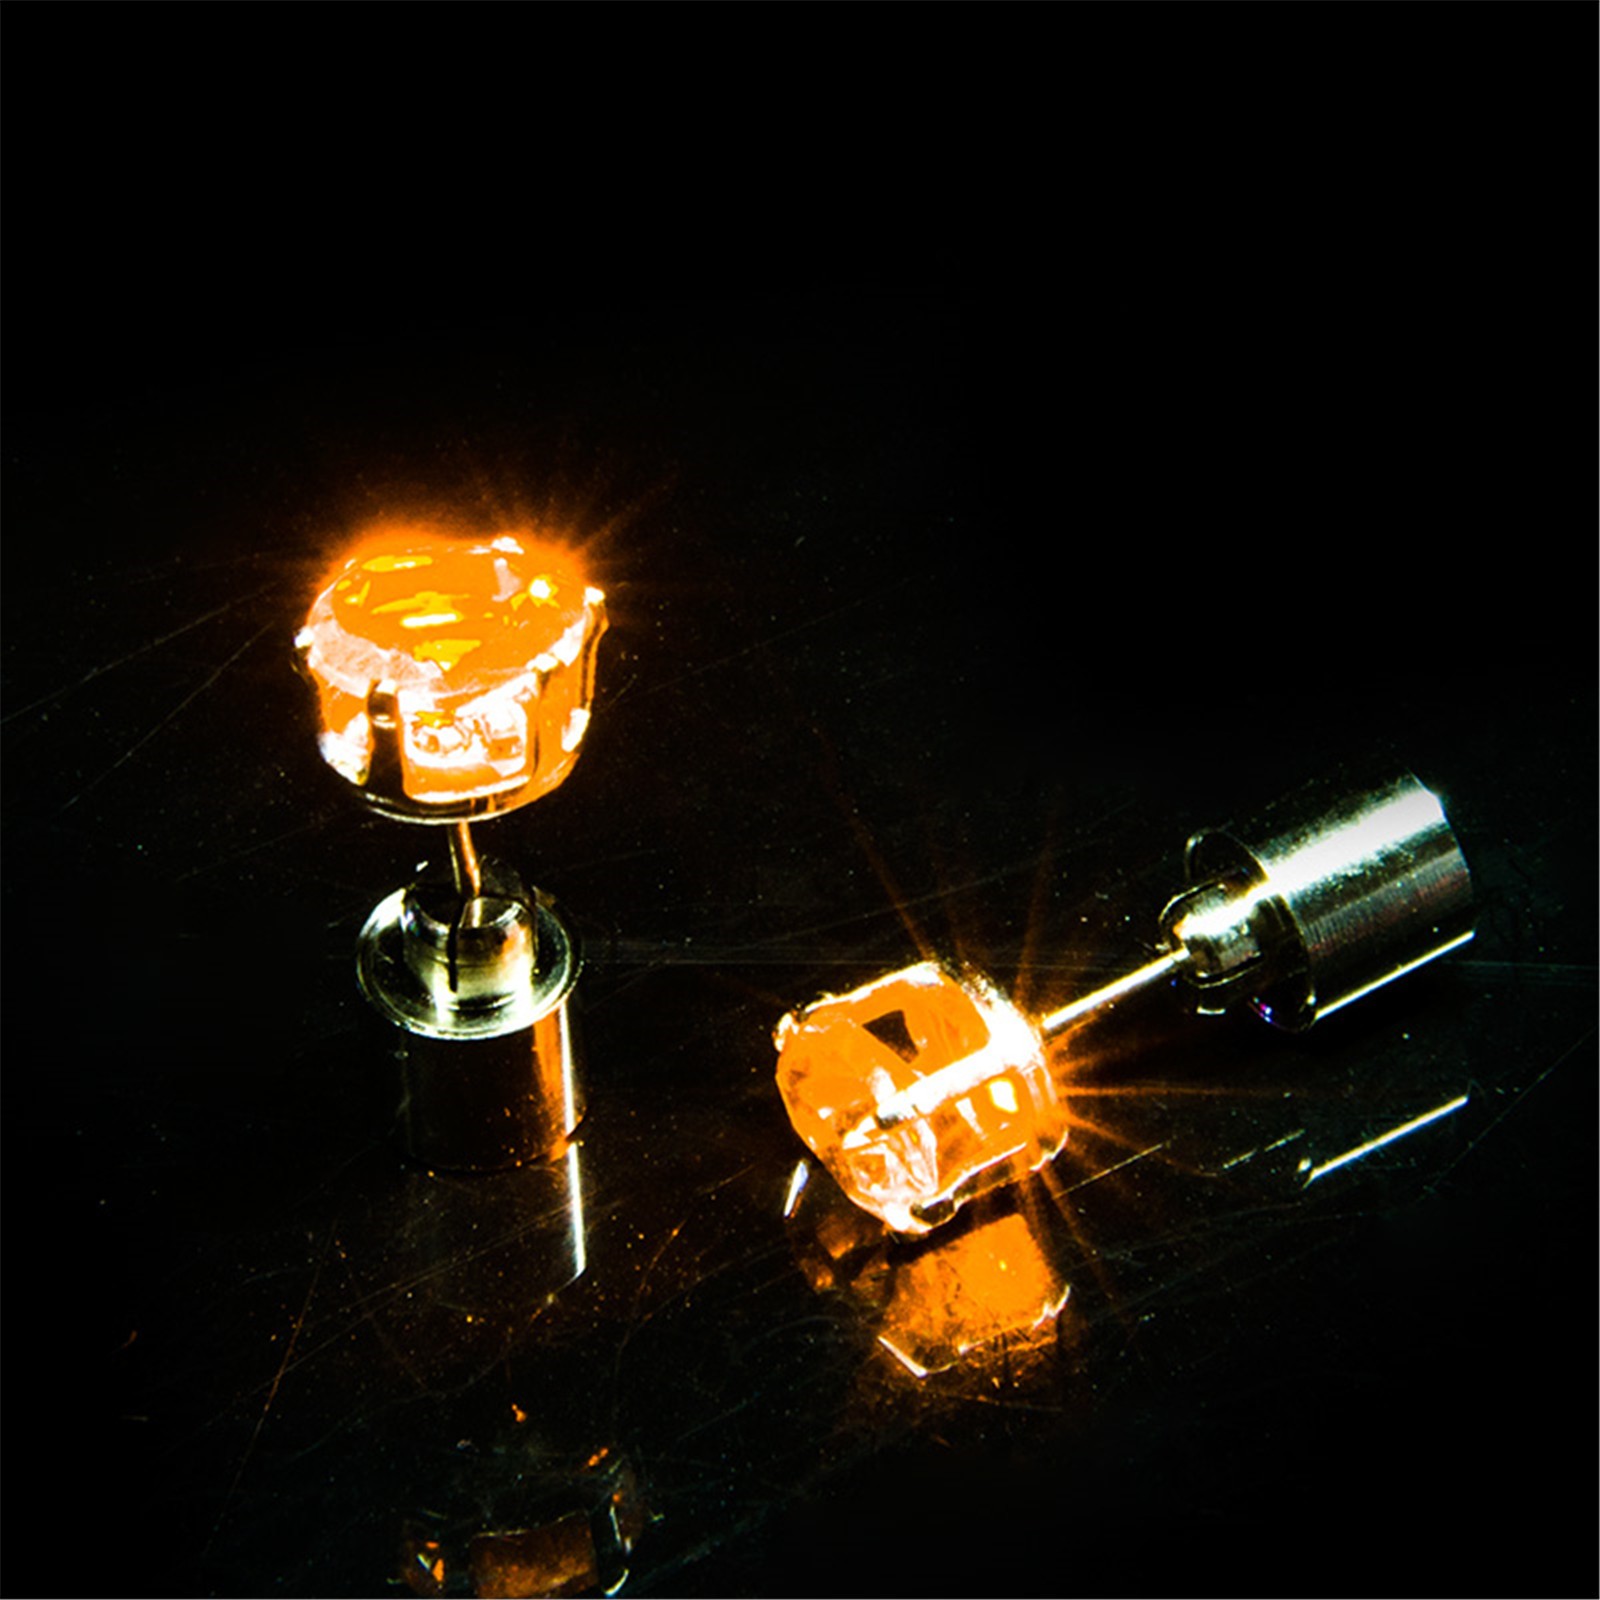 ONHUON 1 Pairs LED Earrings Glowing Light Up Diamond Ear Drop Pendant Stud Stainless Multi-Color For Party Festival - image 1 of 4